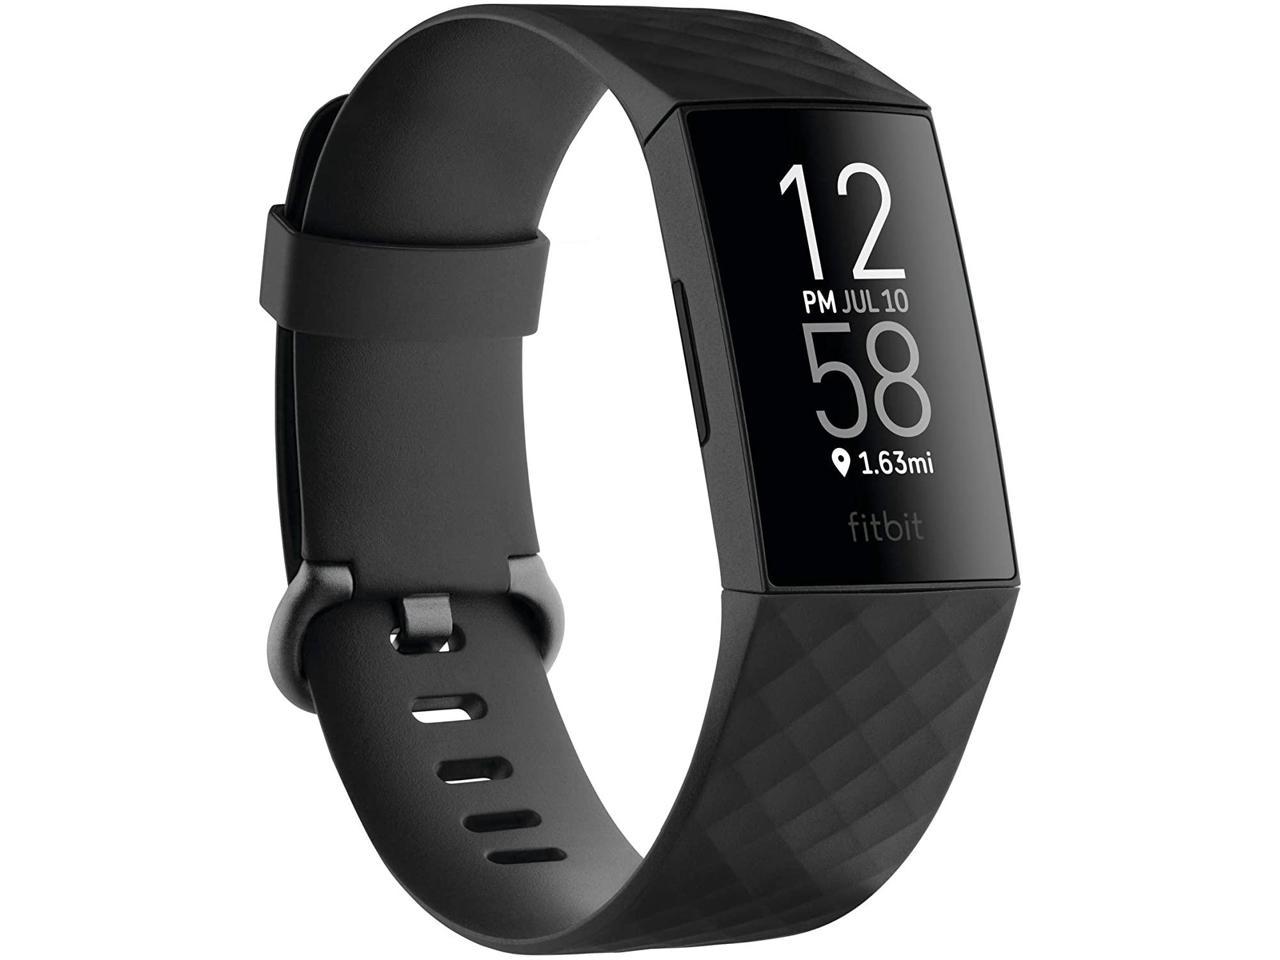 S/P FREE SHIPPING! Fitbit Alta Fitness Activity Tracker Black 